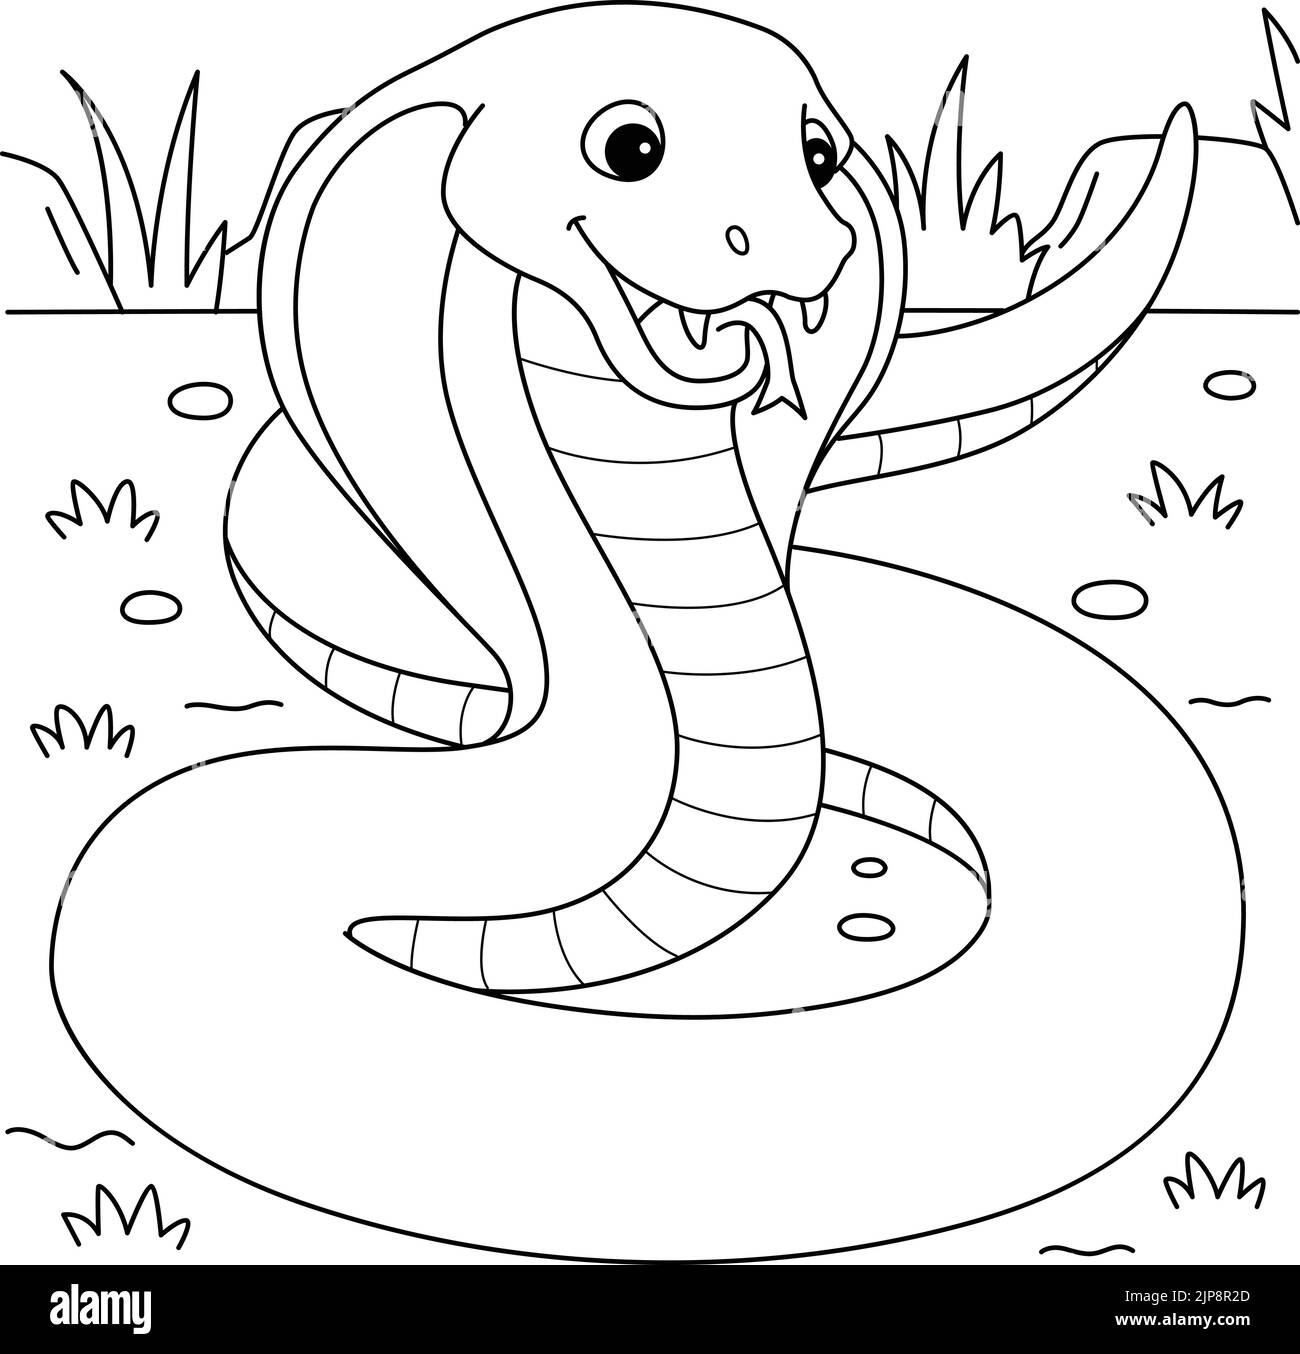 Cobra Animal Coloring Page for Kids Stock Vector